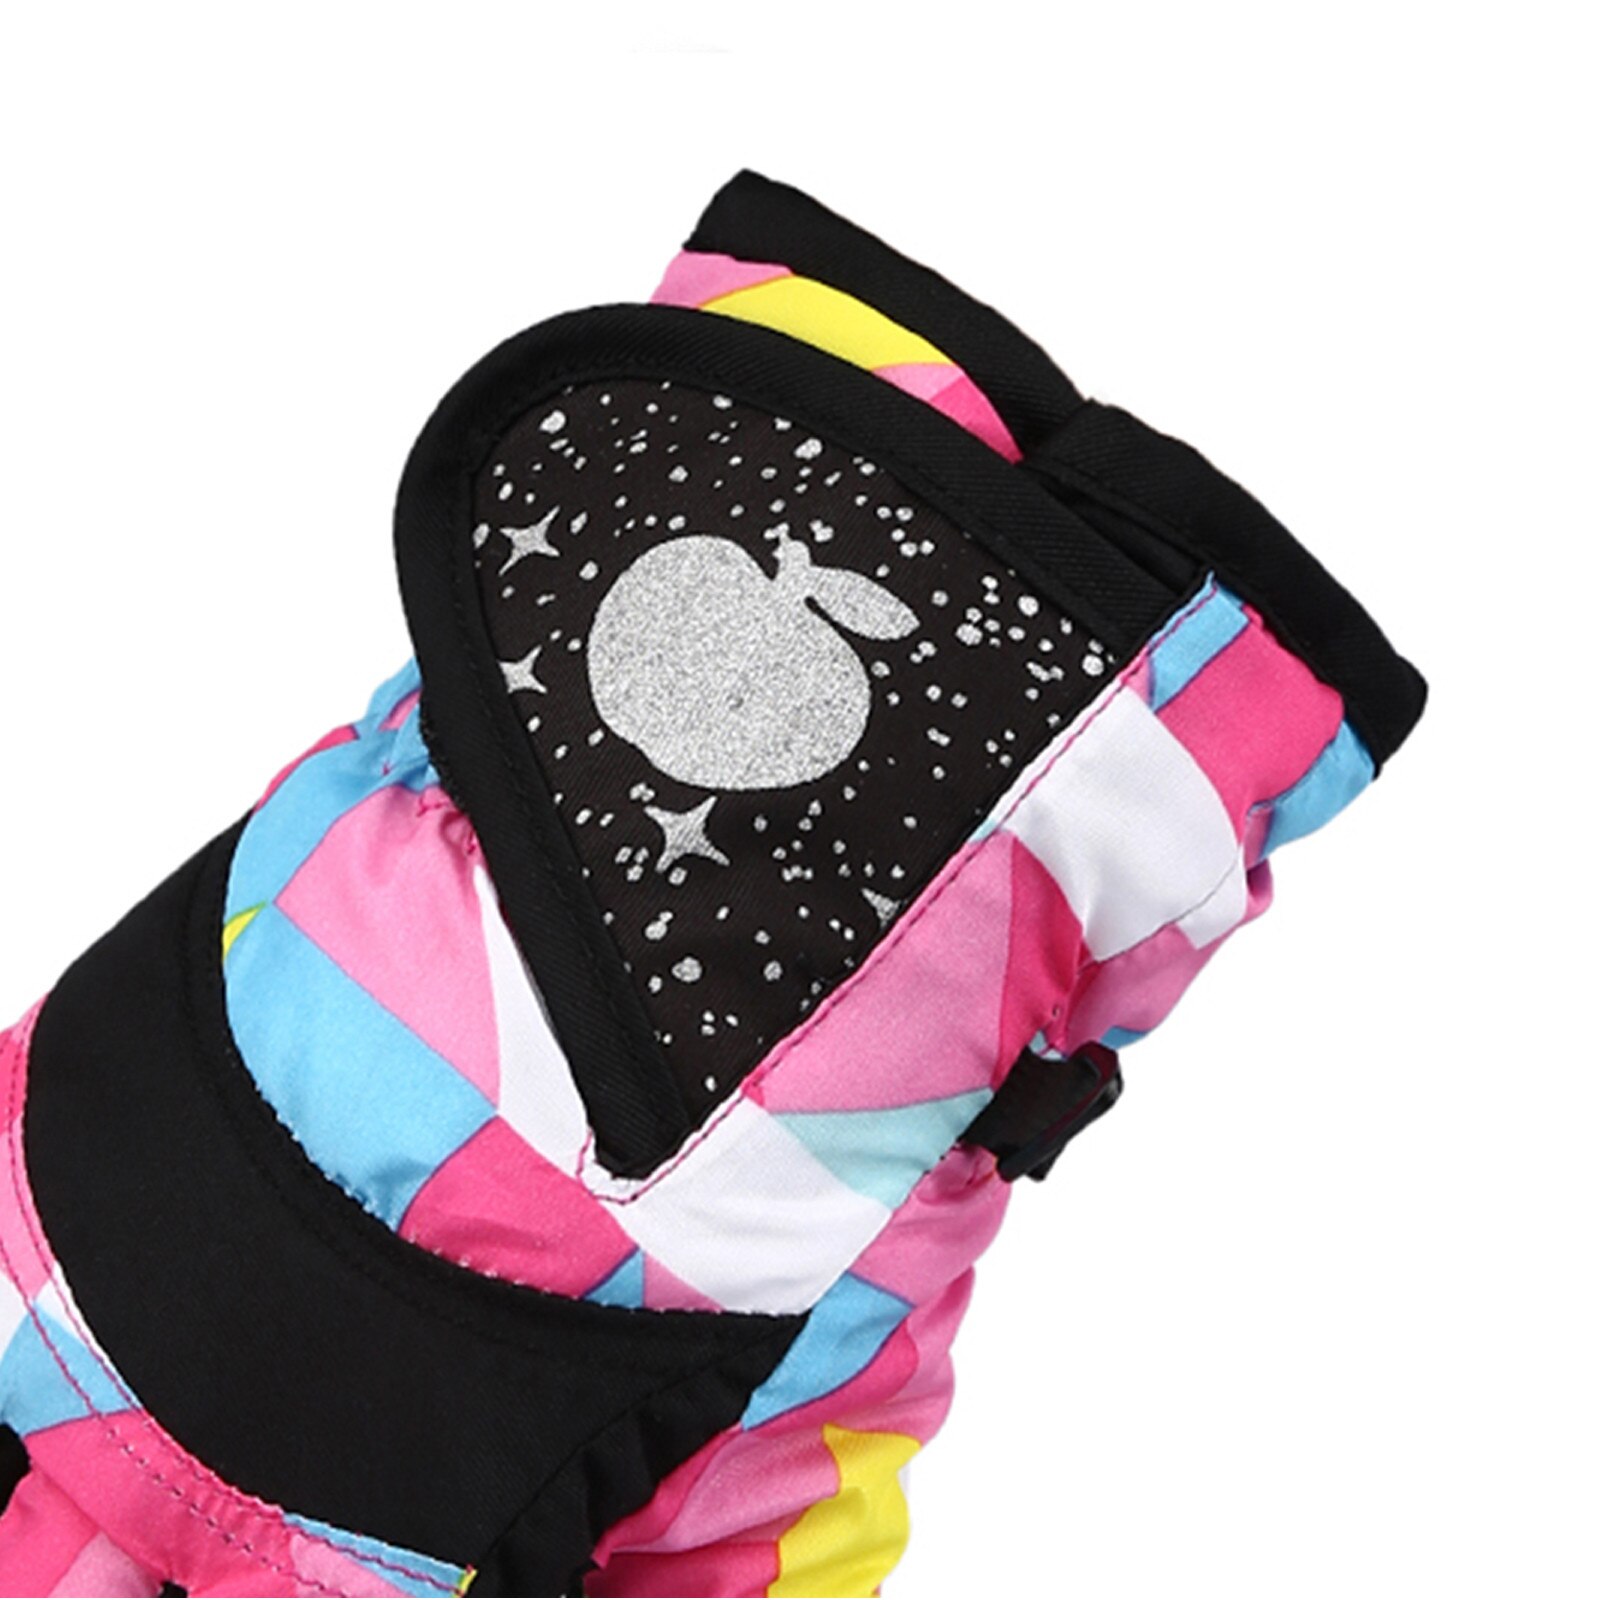 Winter Gloves for Kids Boys Girls Snow Windproof Mittens Outdoor Sports Skiing